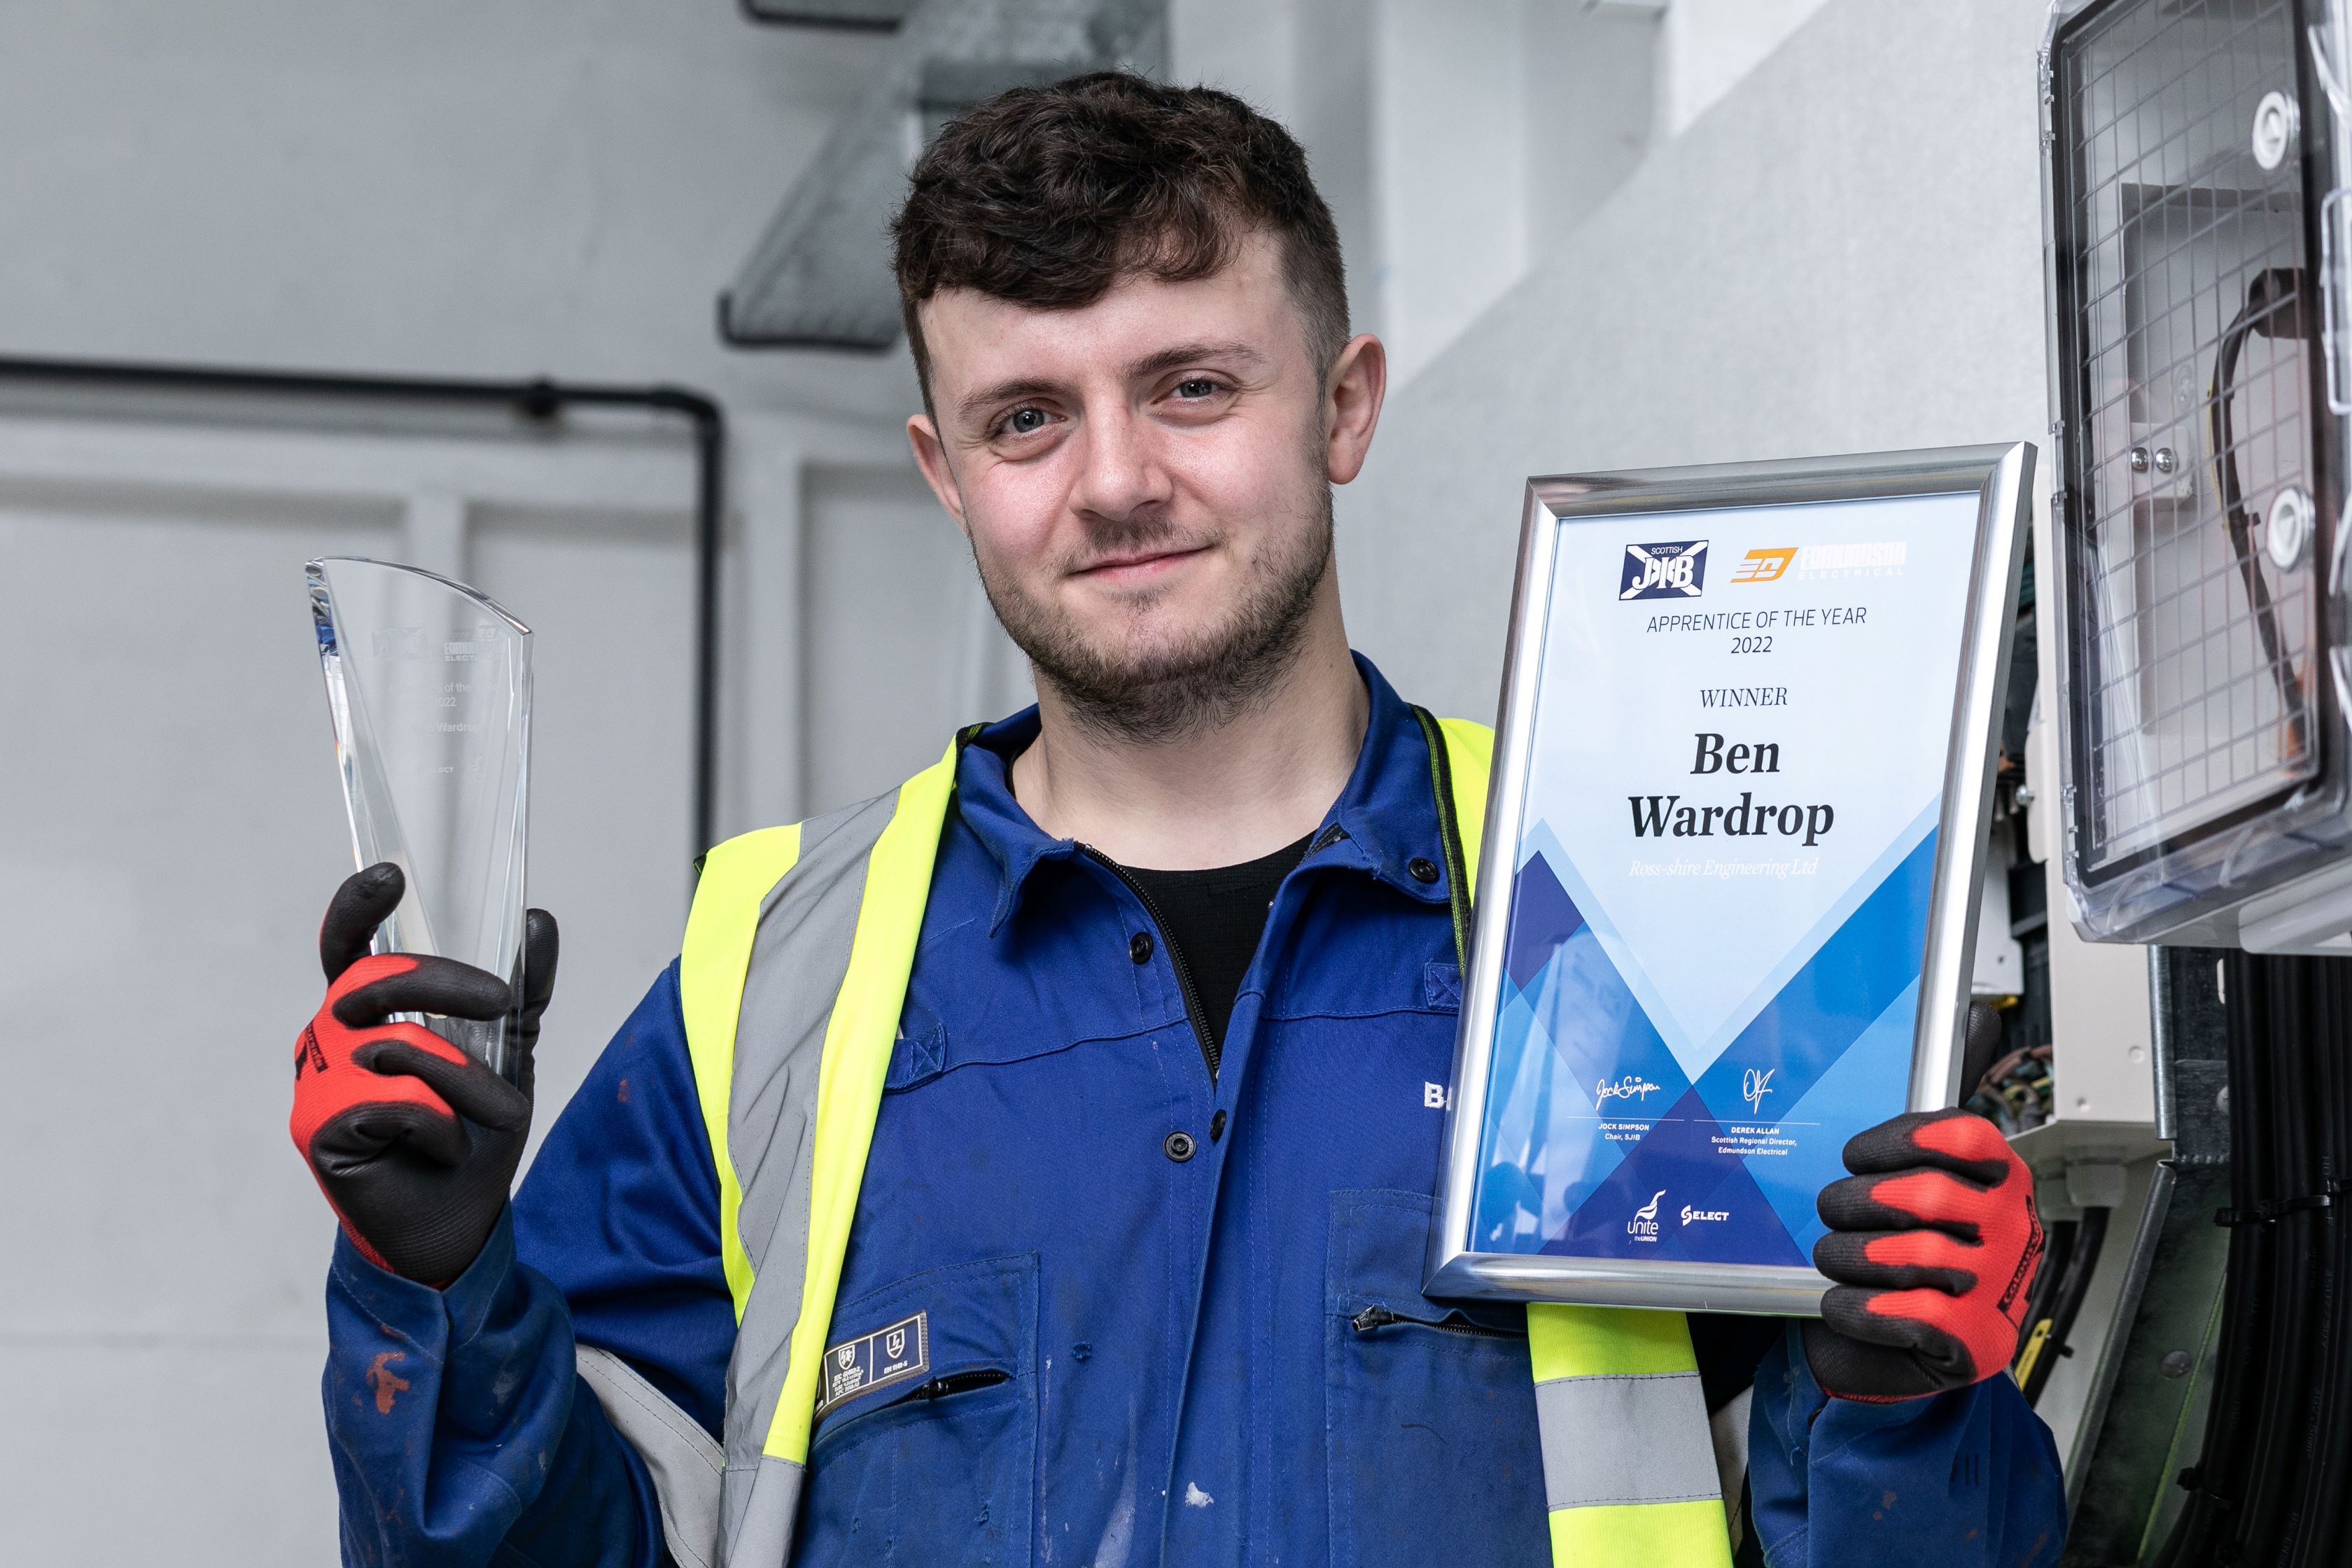 SJIB Apprentices of the Year announced